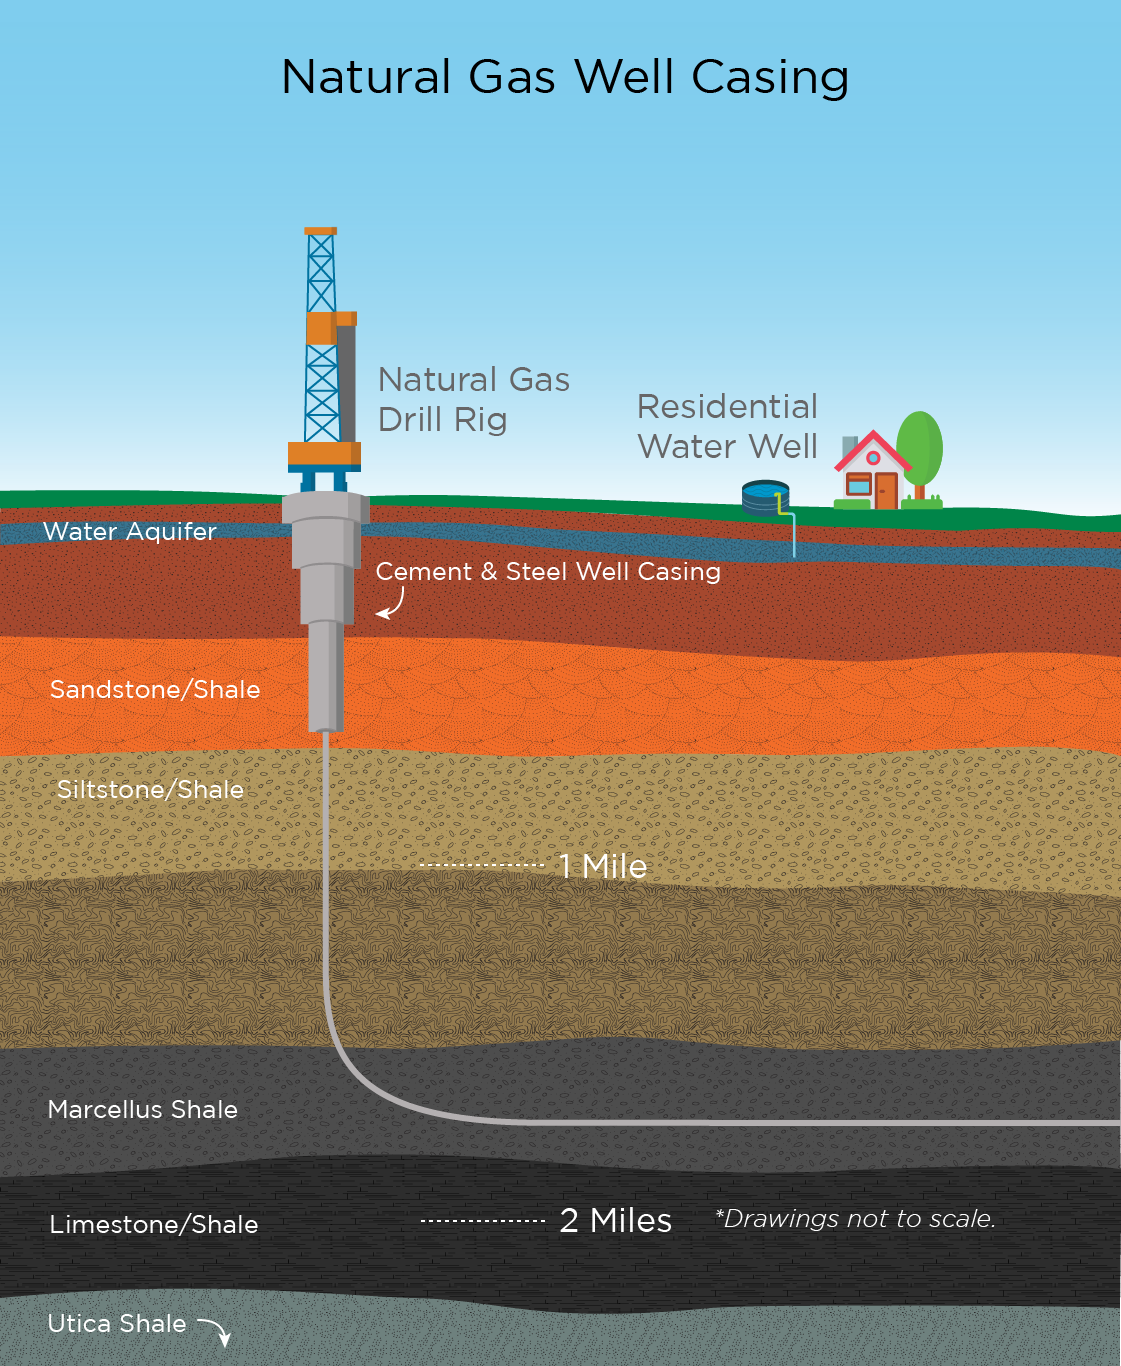 Natural gas well casing illustration